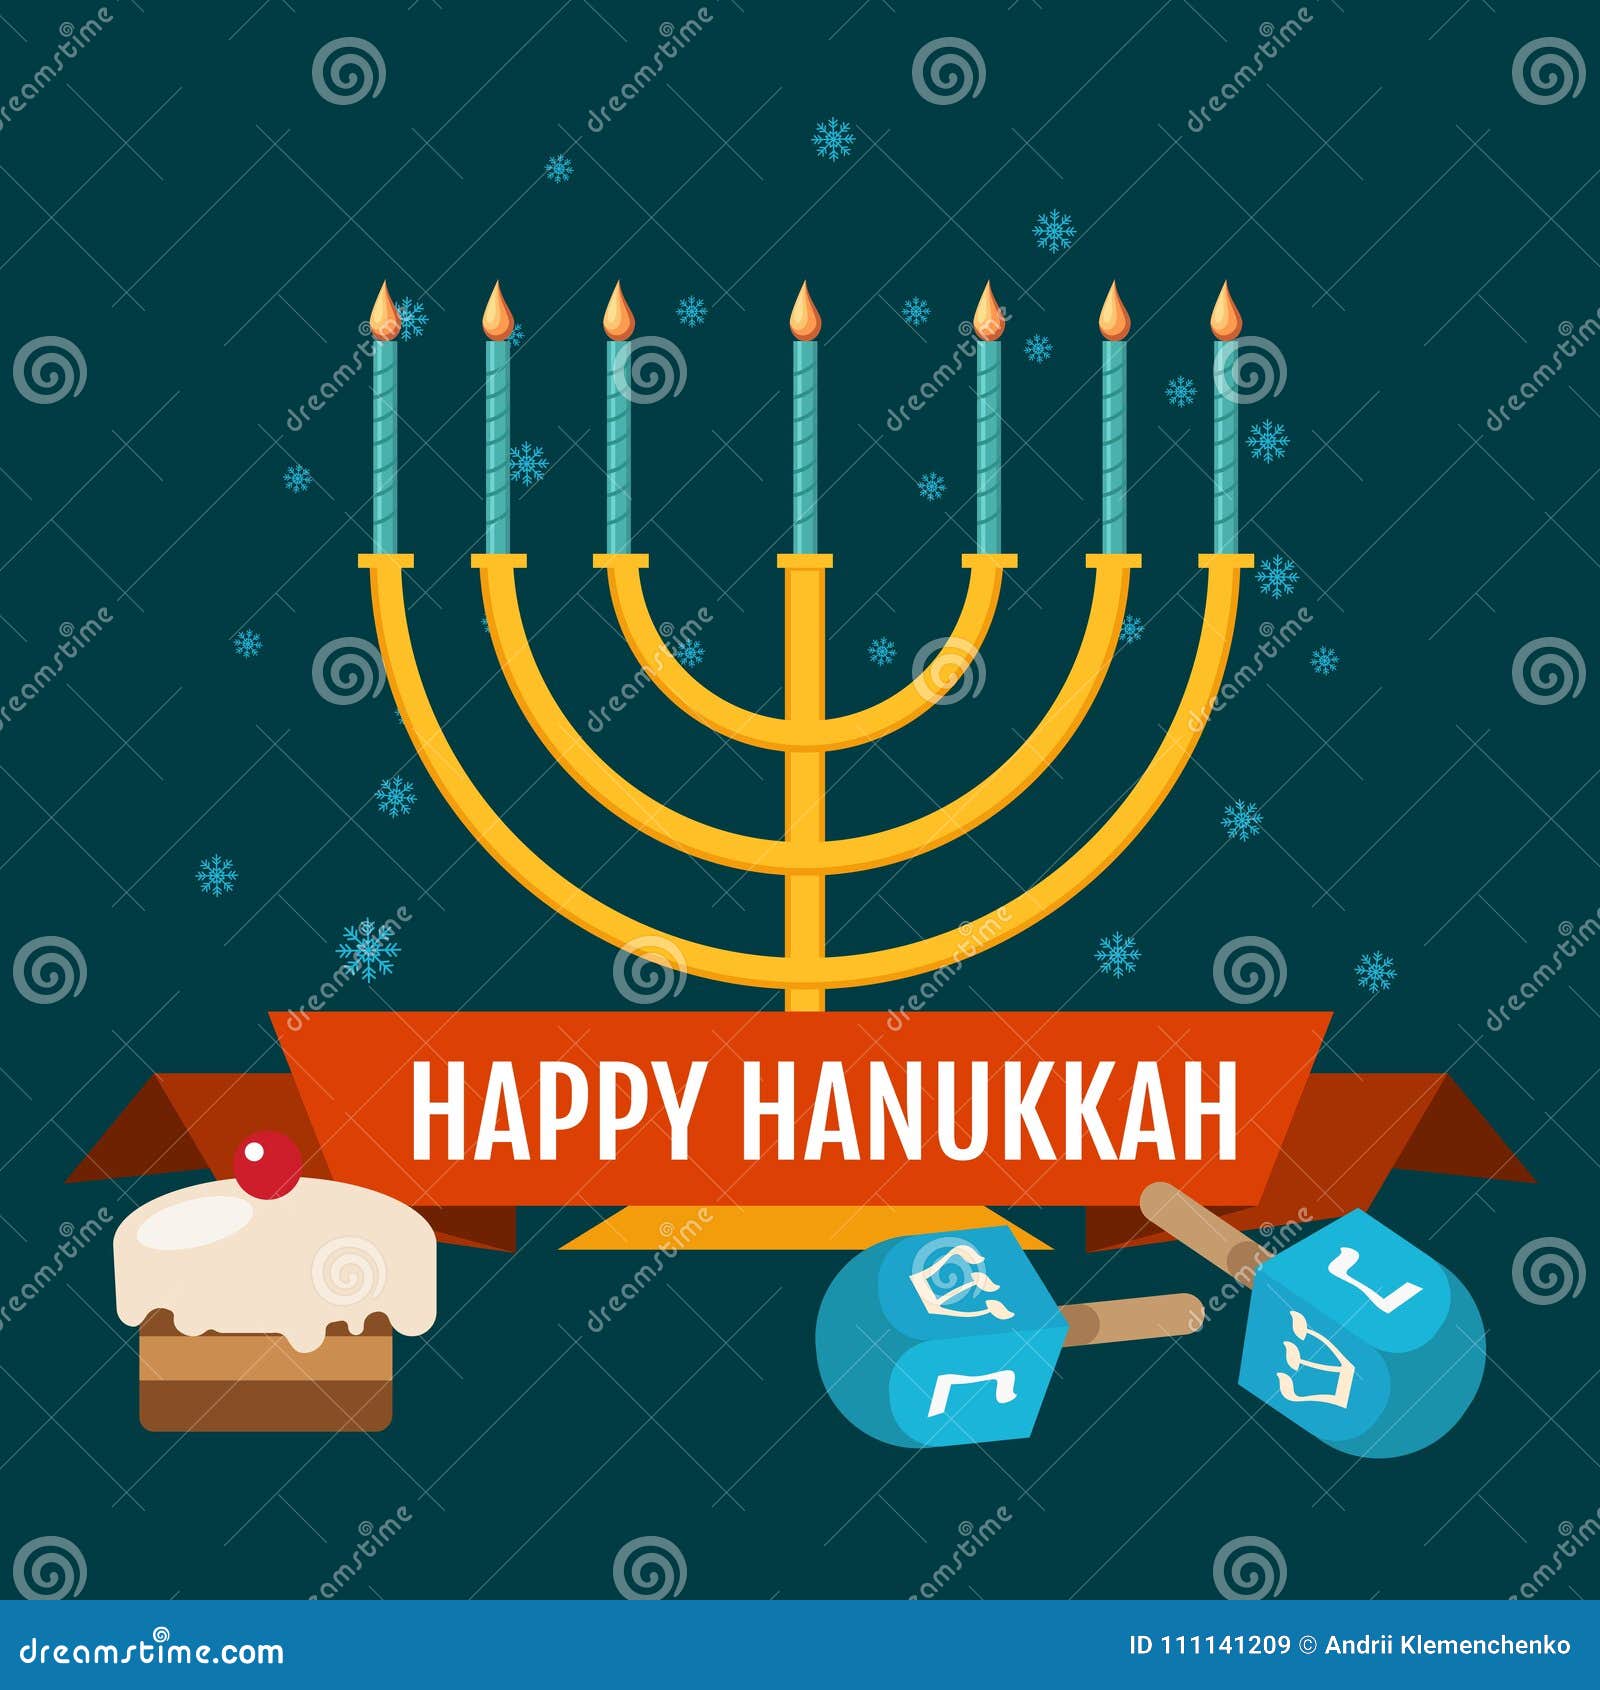 Hanukkah Sale For An Emblem, Sticker Or Logo With Menorah With Burning Candles. Vector ...